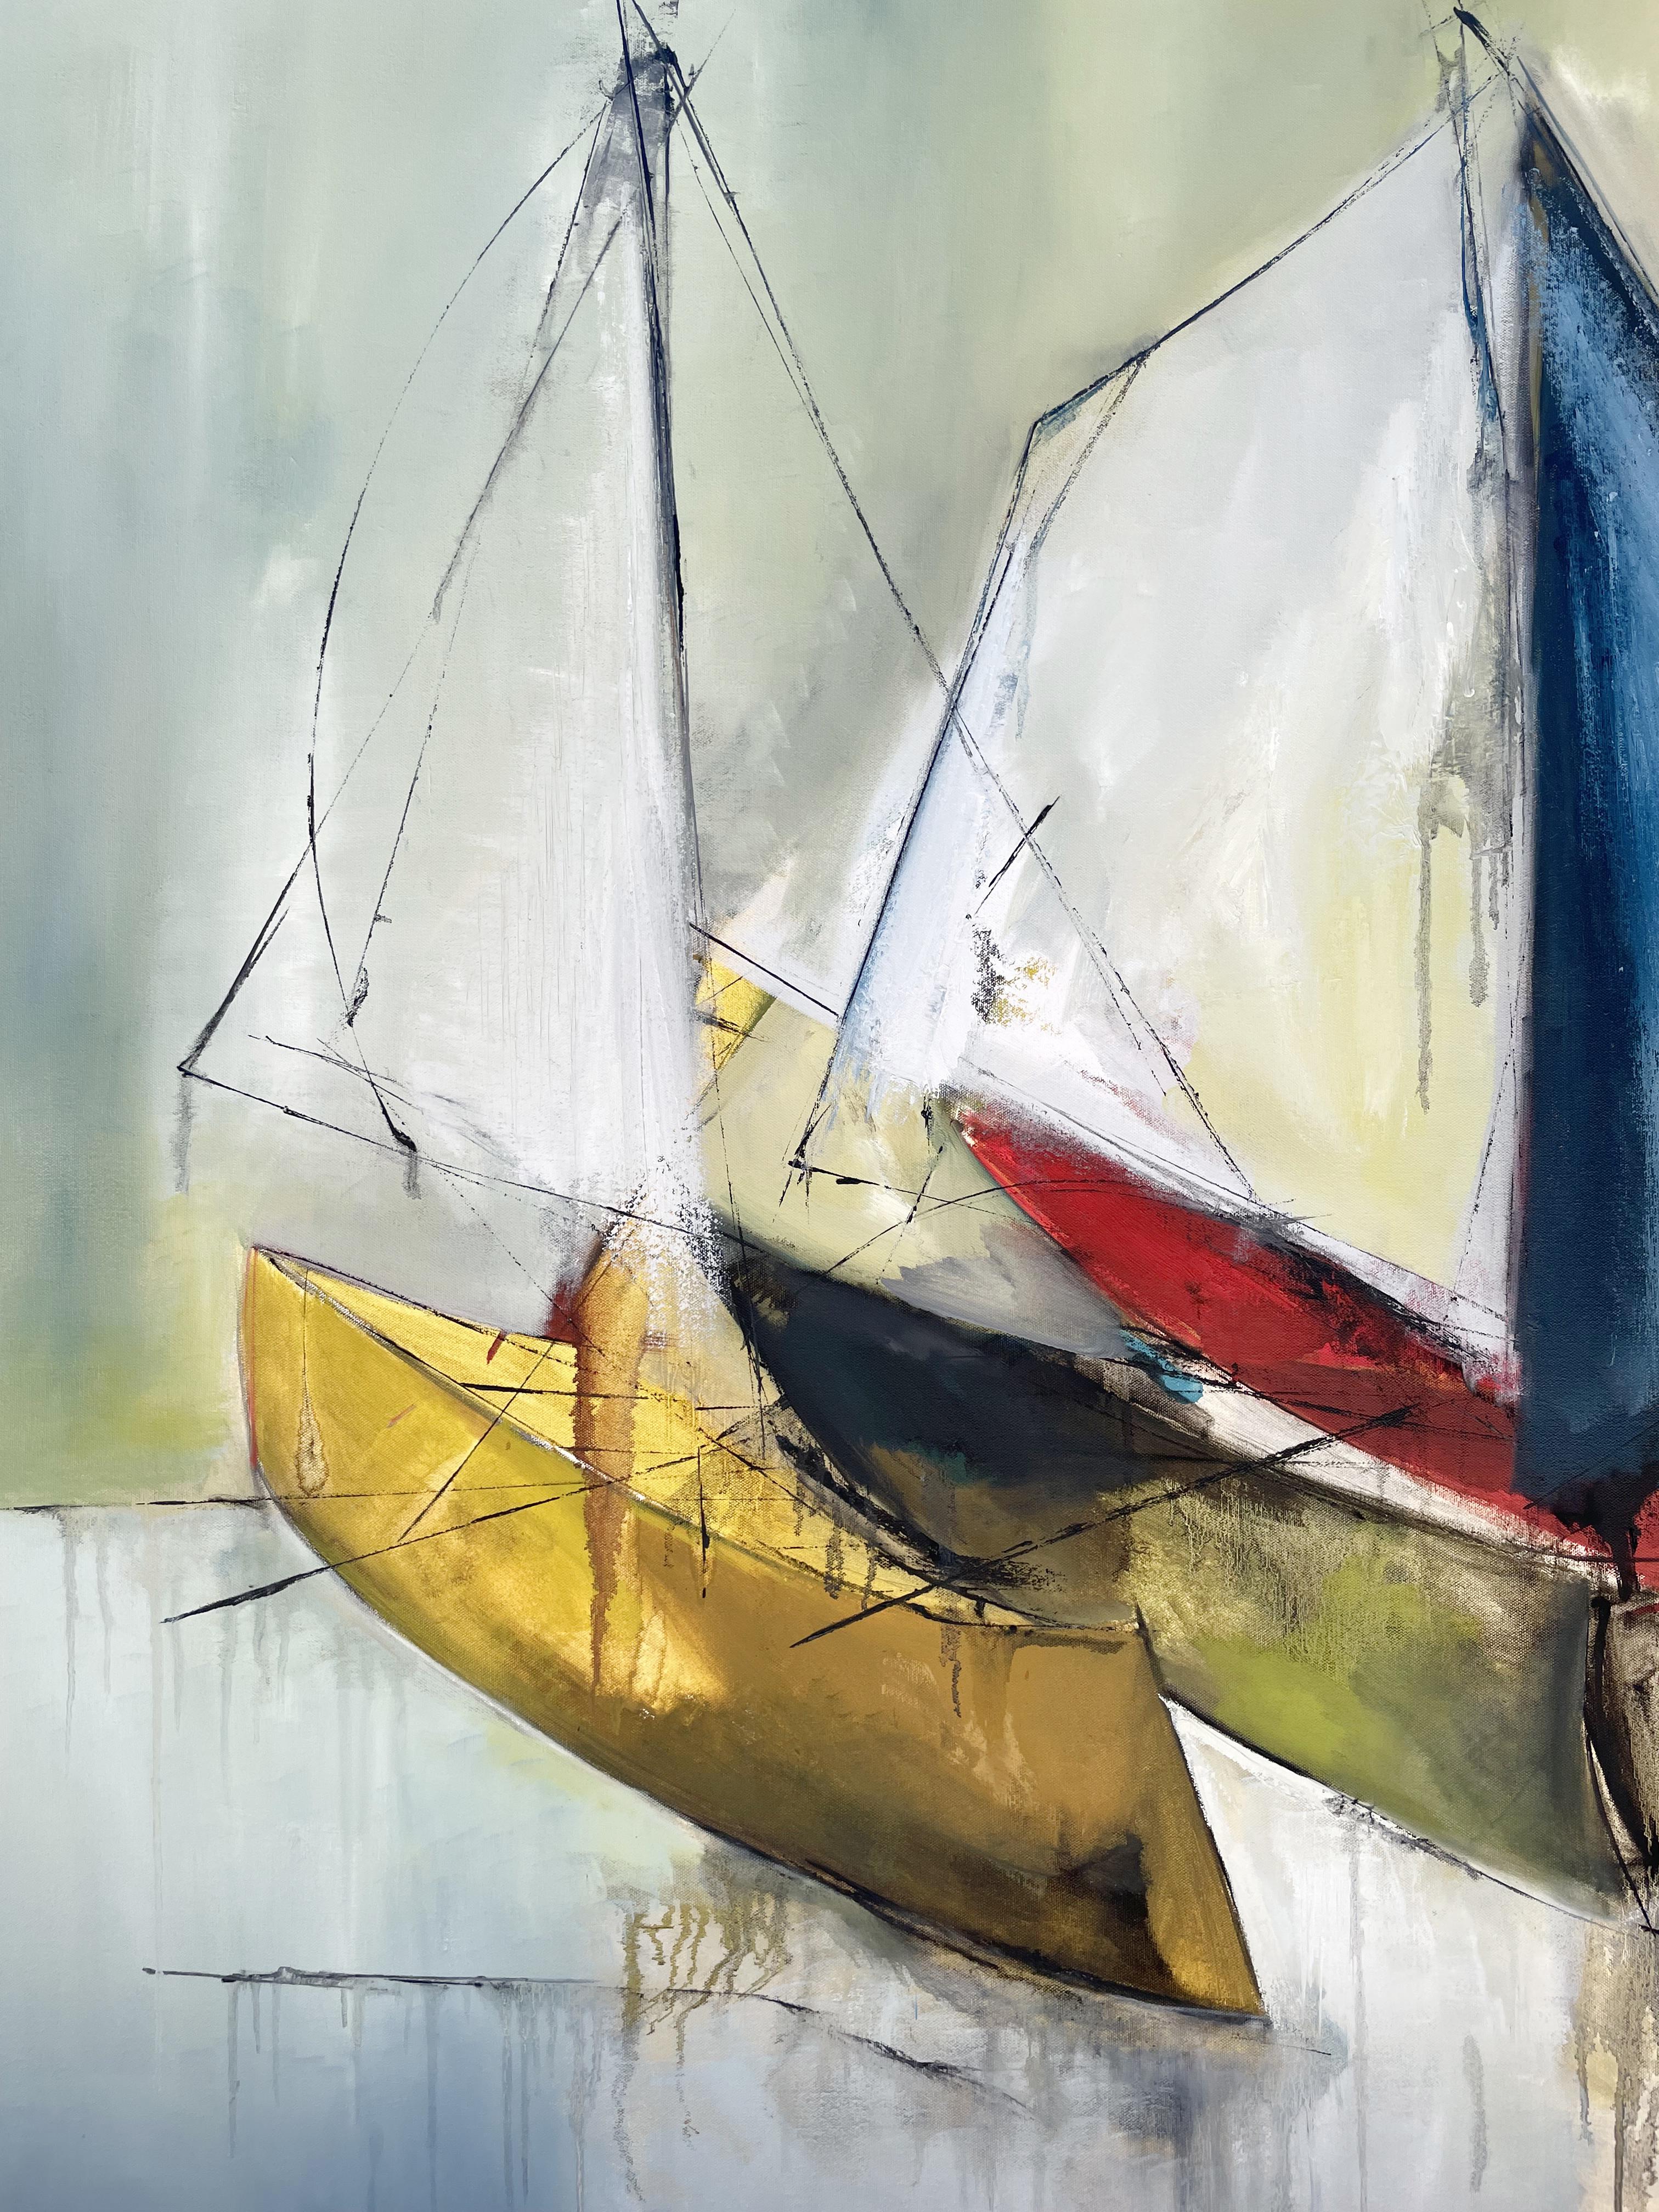 Voiliers, sailboats - American Modern Art by KOKO HOVAGUIMIAN